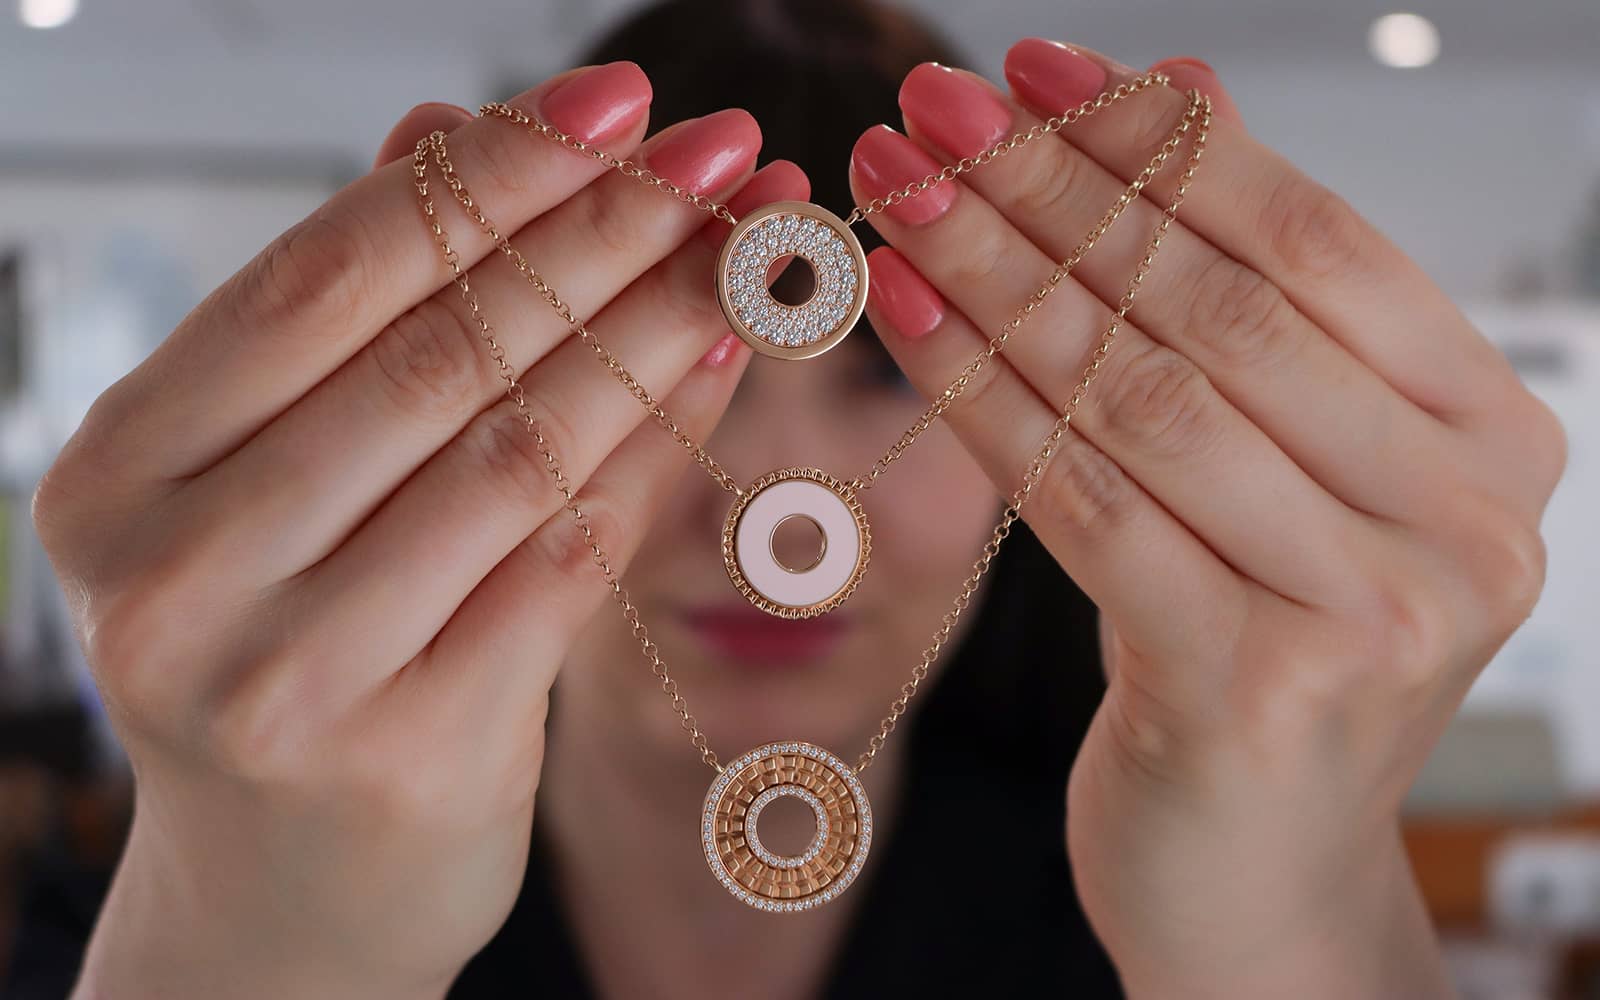 Ferrat Paris necklaces from top to bottom: the Paris necklace with diamonds; the Don’t Take Me For Granted necklace with pink lacquer, and the Triomphe Double Round necklace with diamonds, all in rose gold 